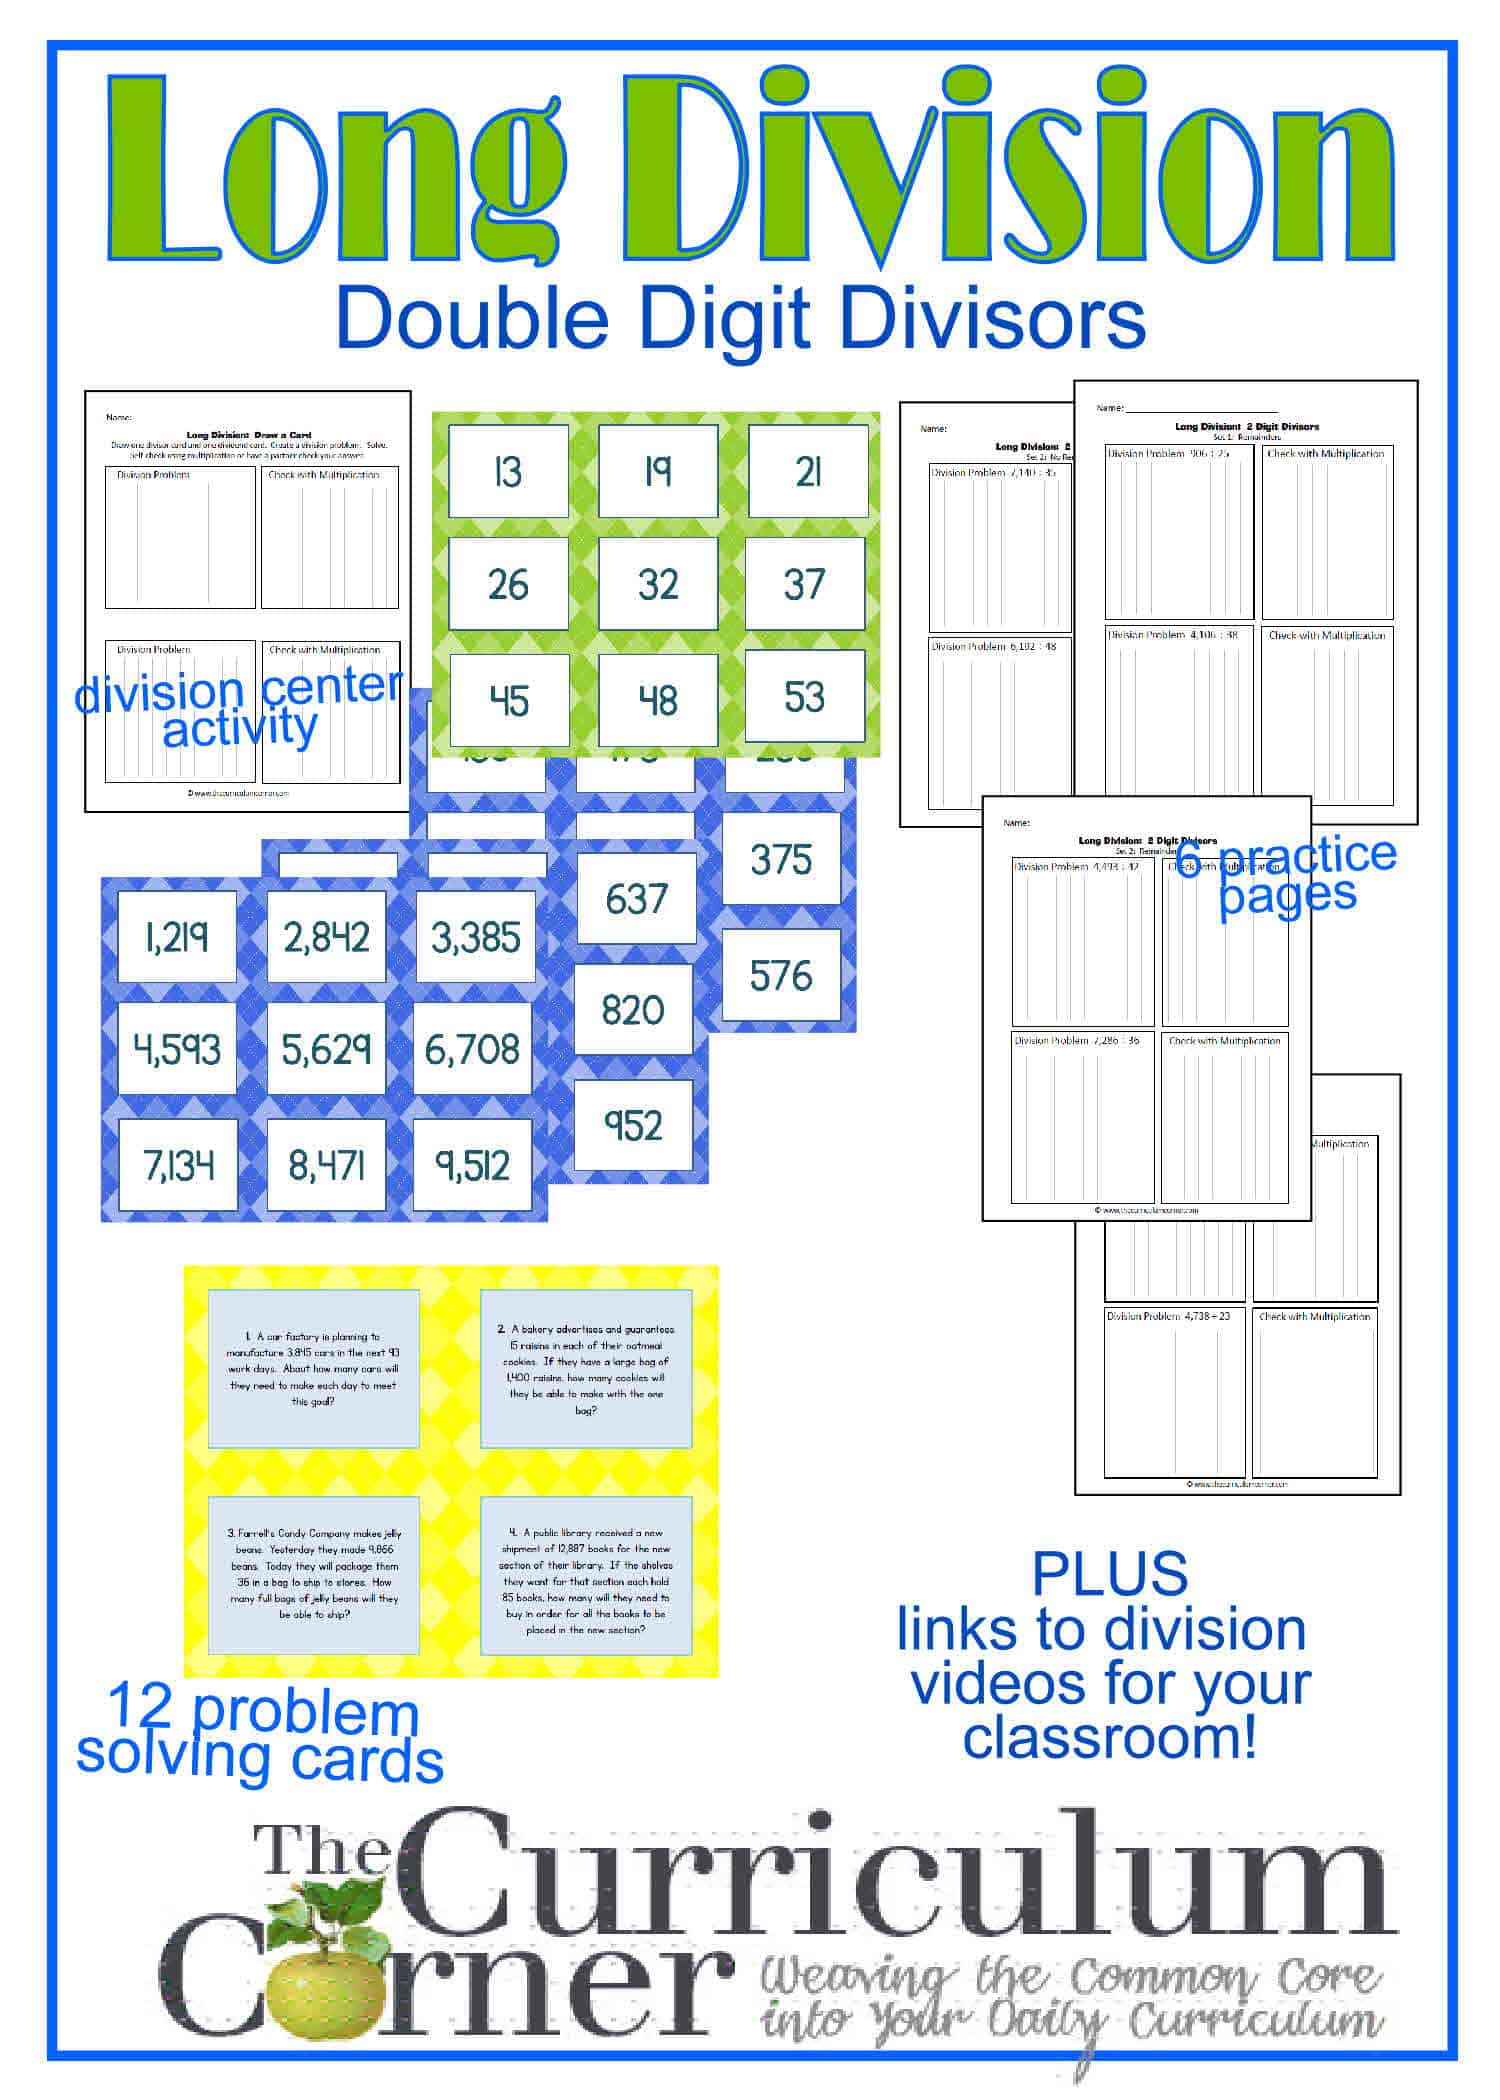 How To Do Division With Double Digit Divisor